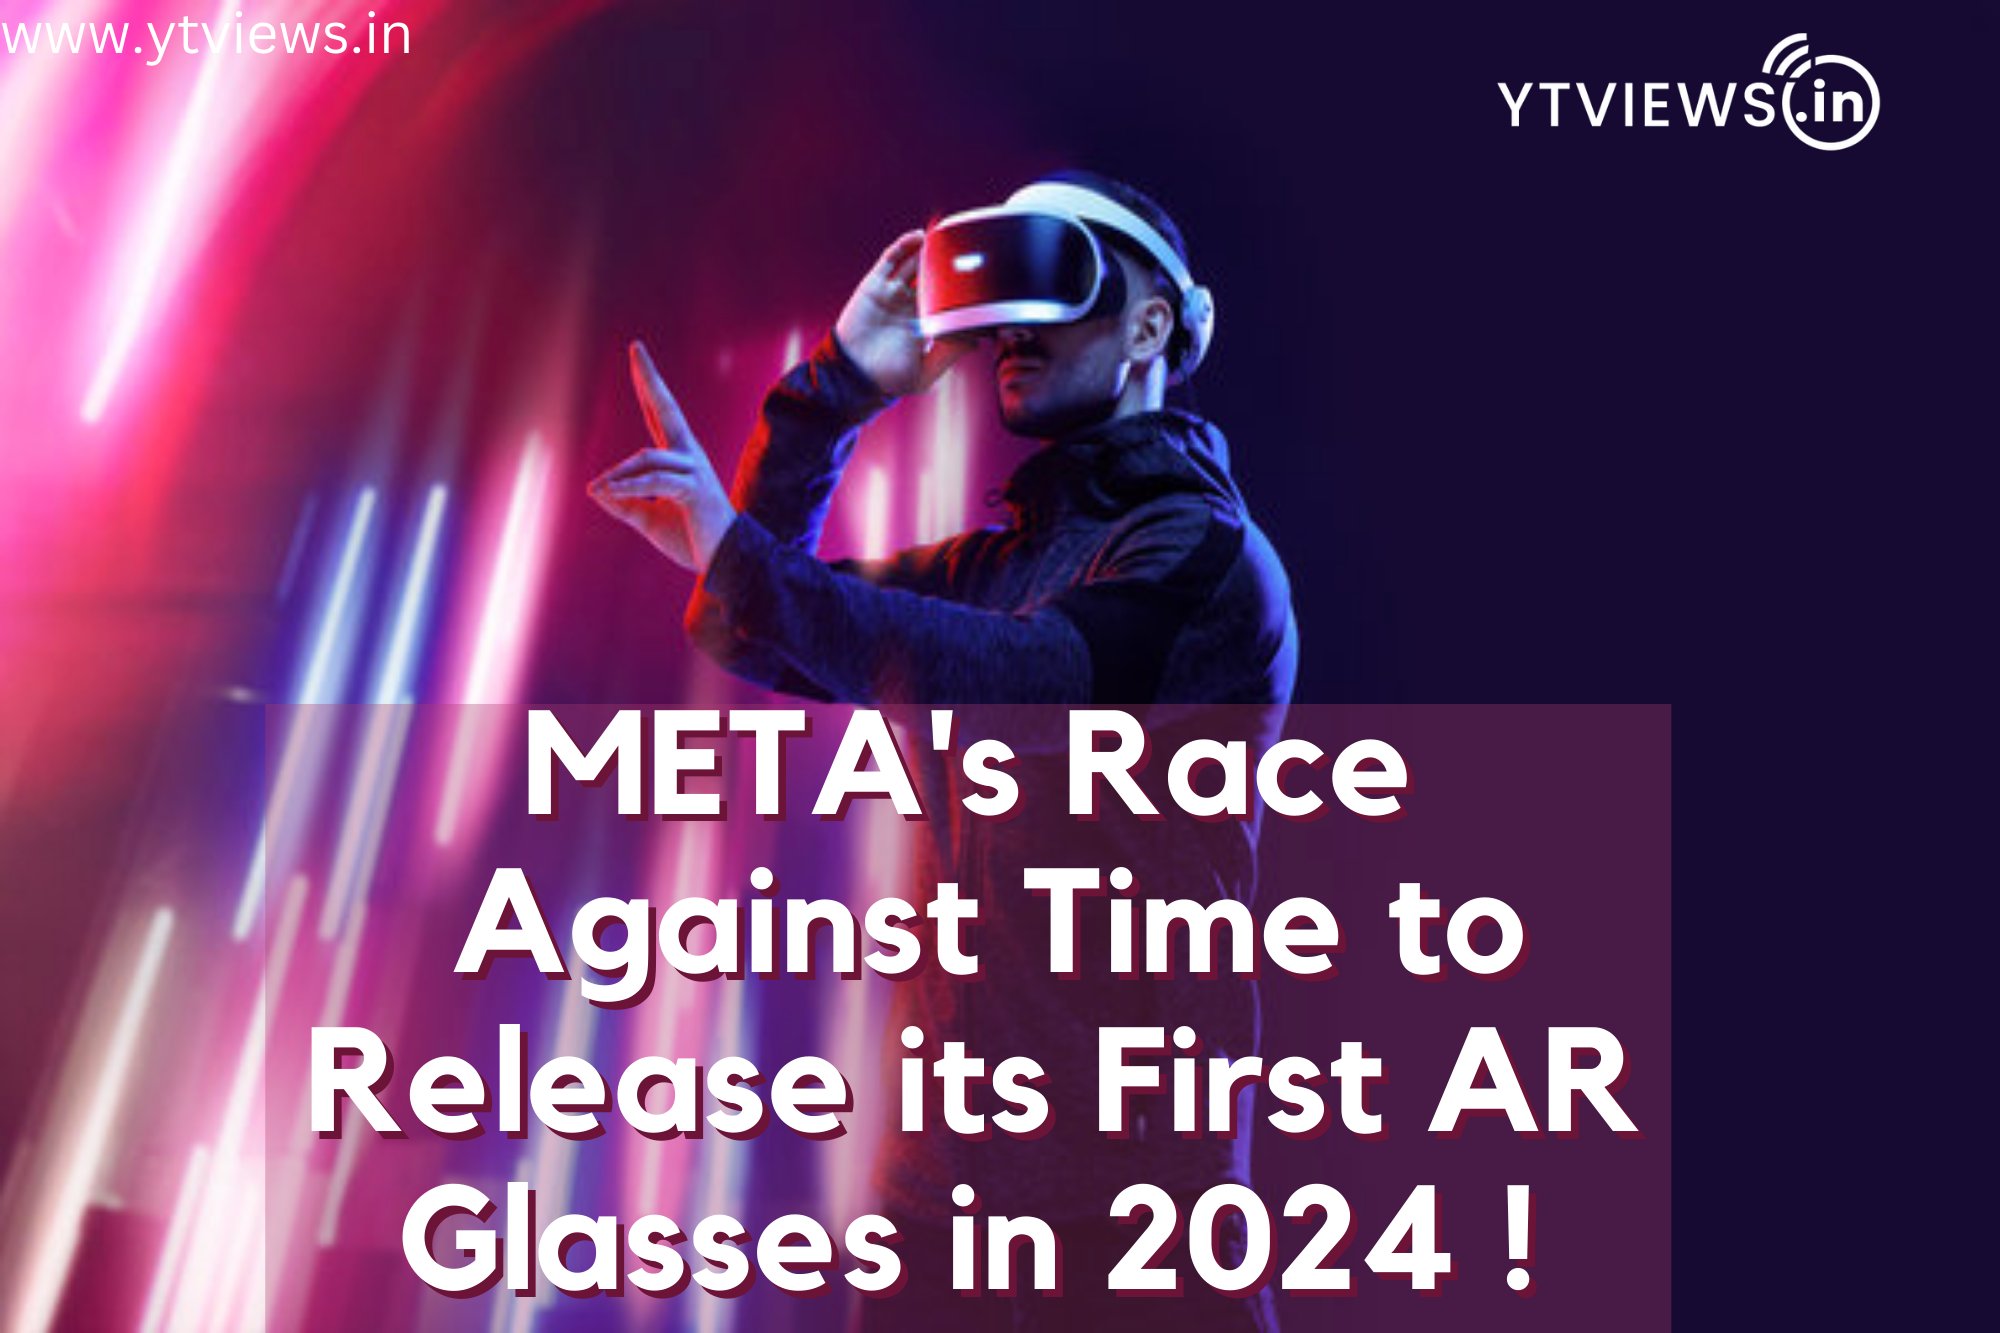 Meta’s race against time to release its first AR glasses in 2024